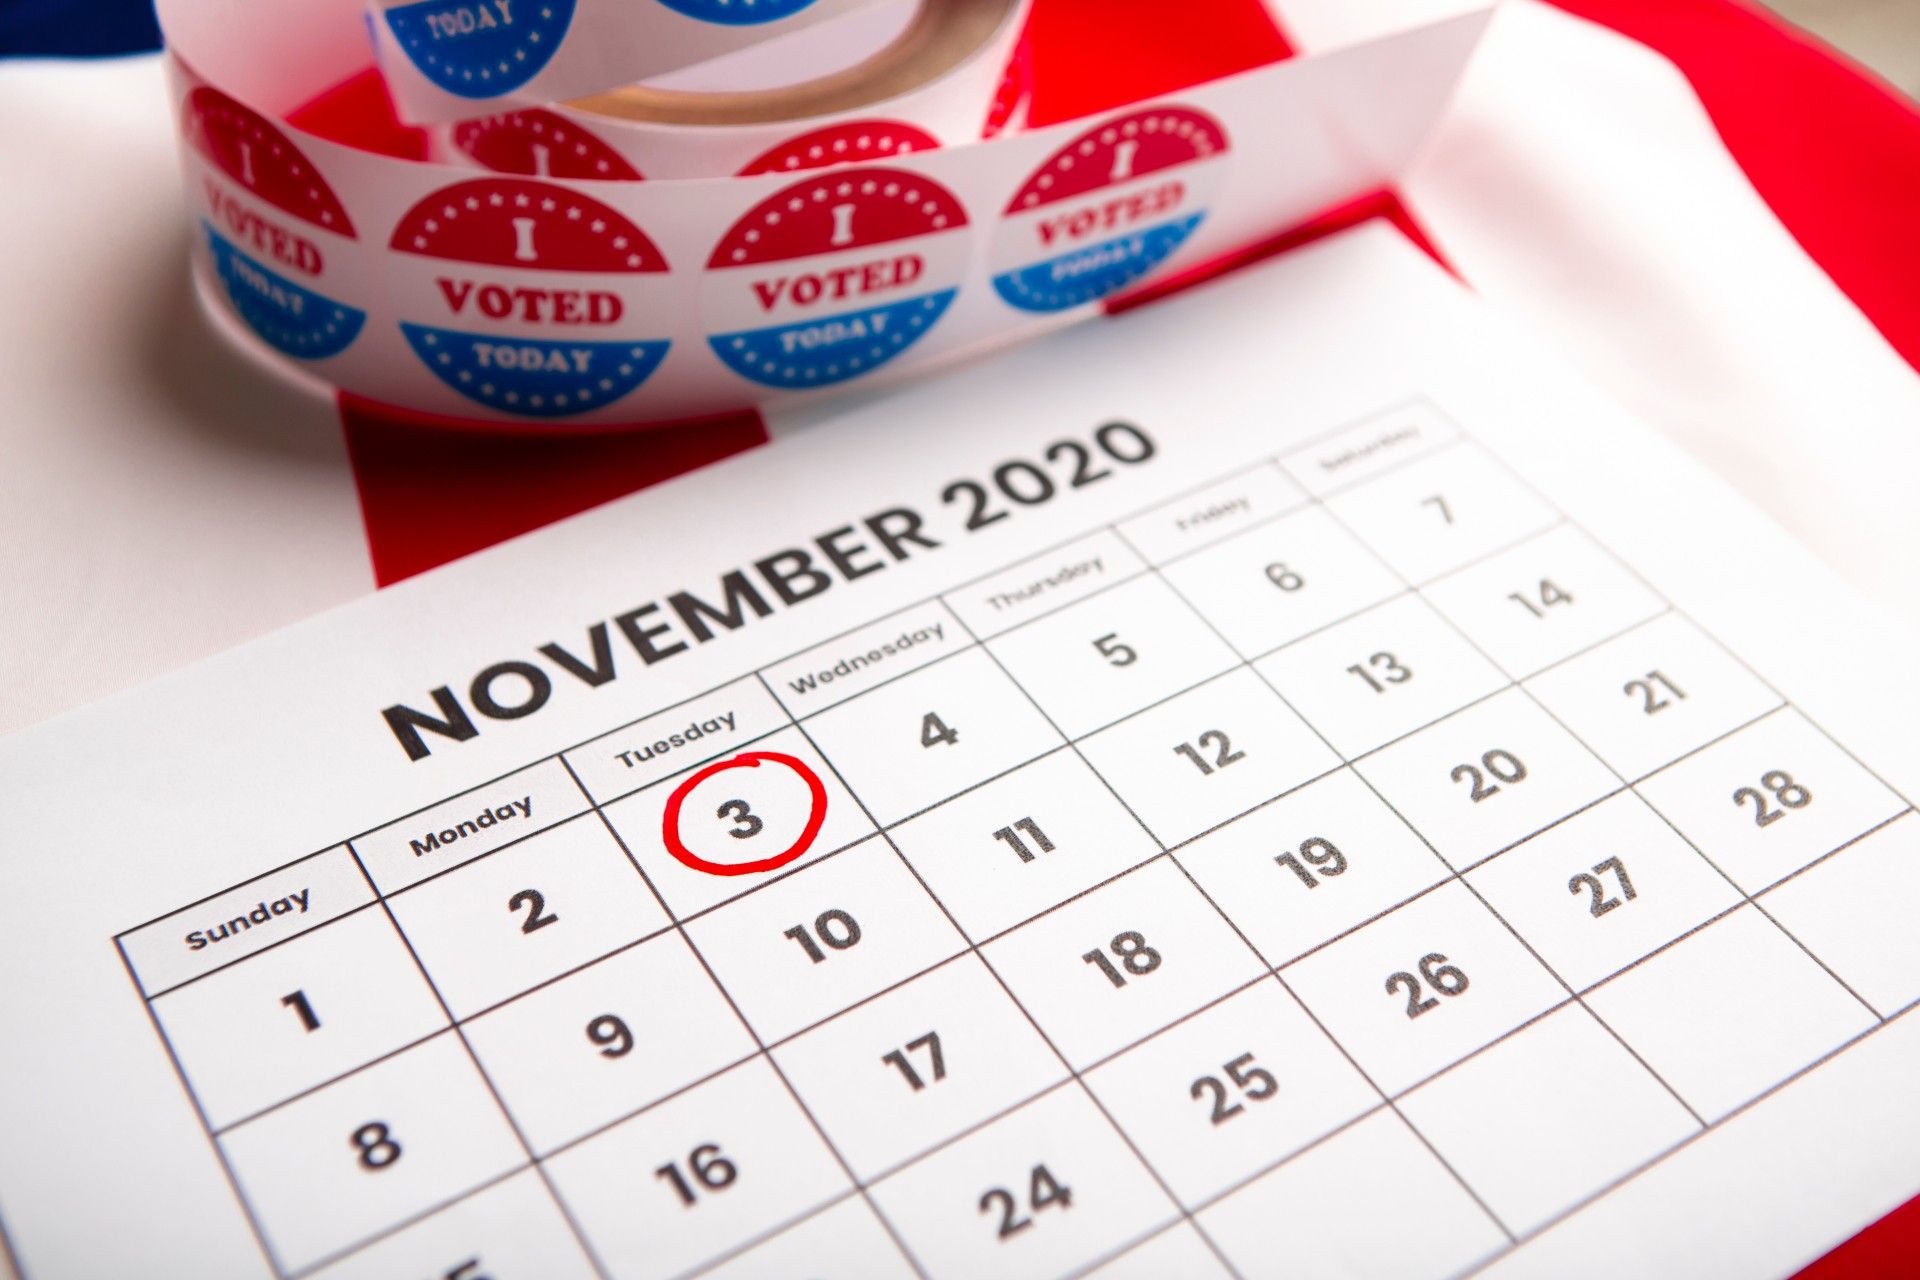 A roll of red-white-and-blue "I voted today" stickers sitting near a November 2020 calendar with the 3rd circled in red - Illinois voters